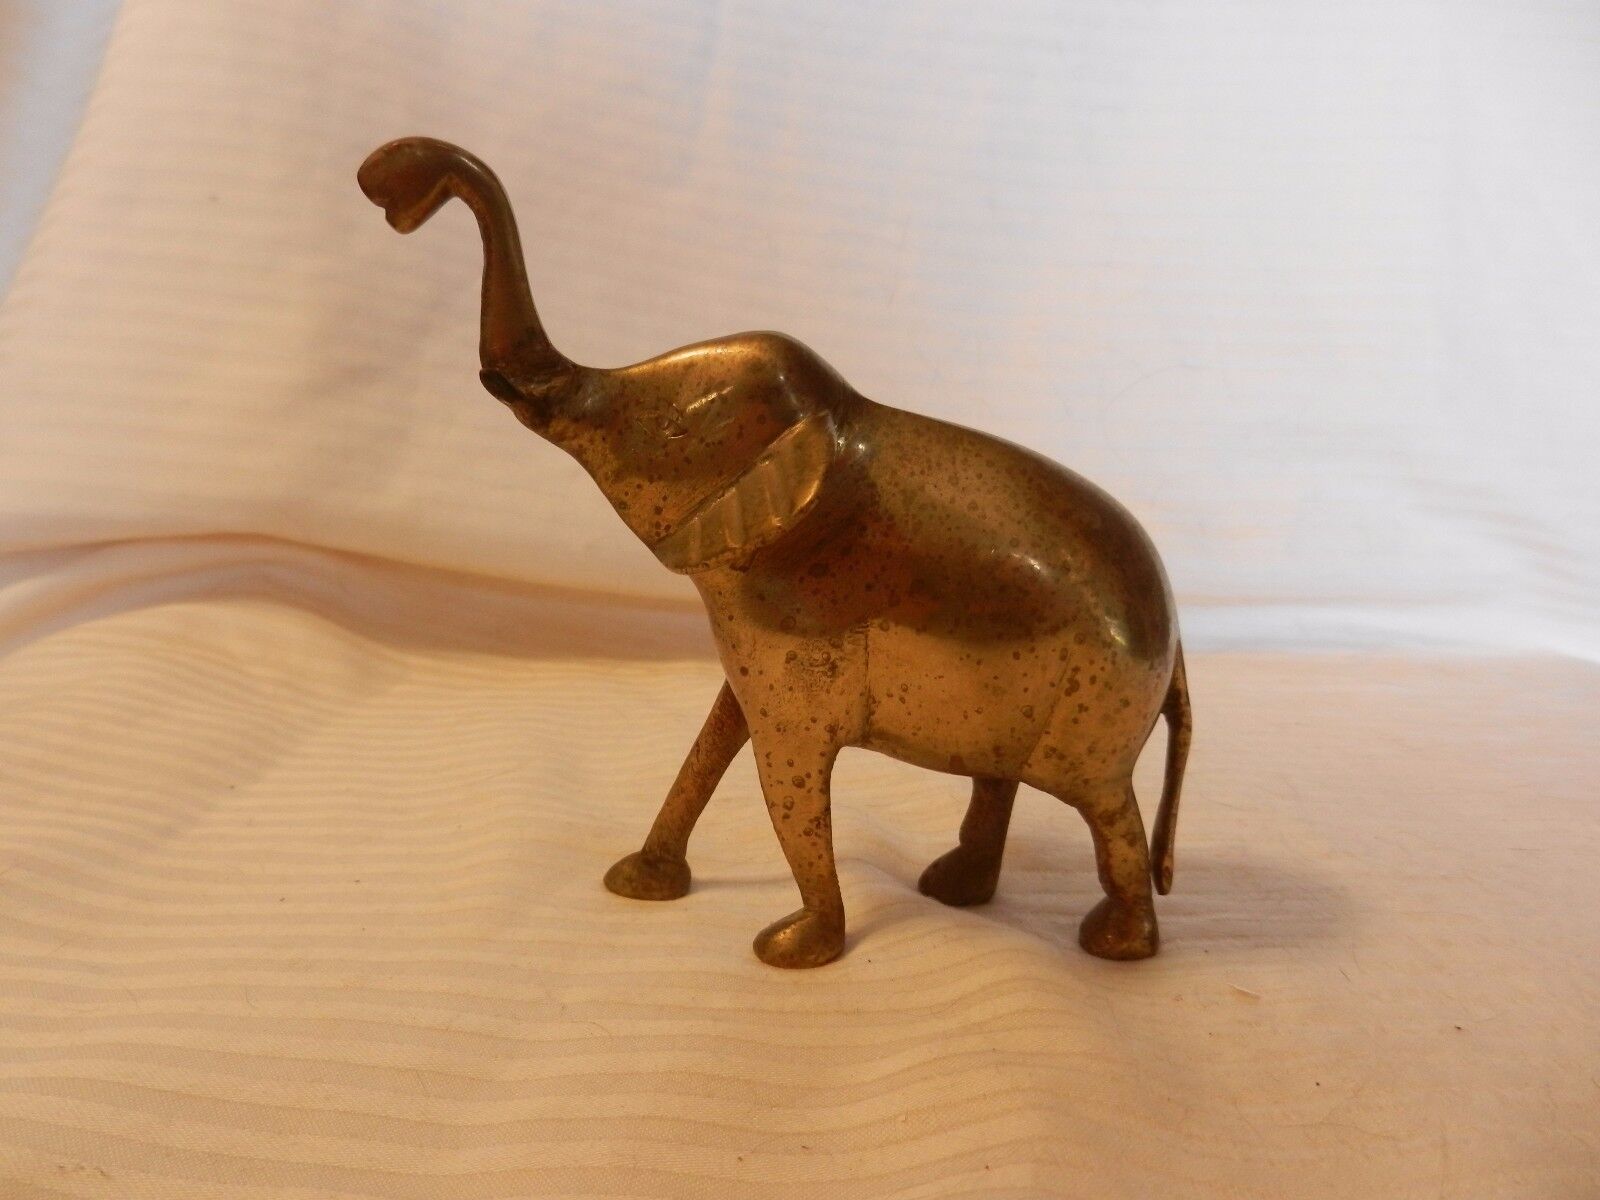 Brass Walking Elephant Figurine With Trunk Up For Good Luck 4.75\